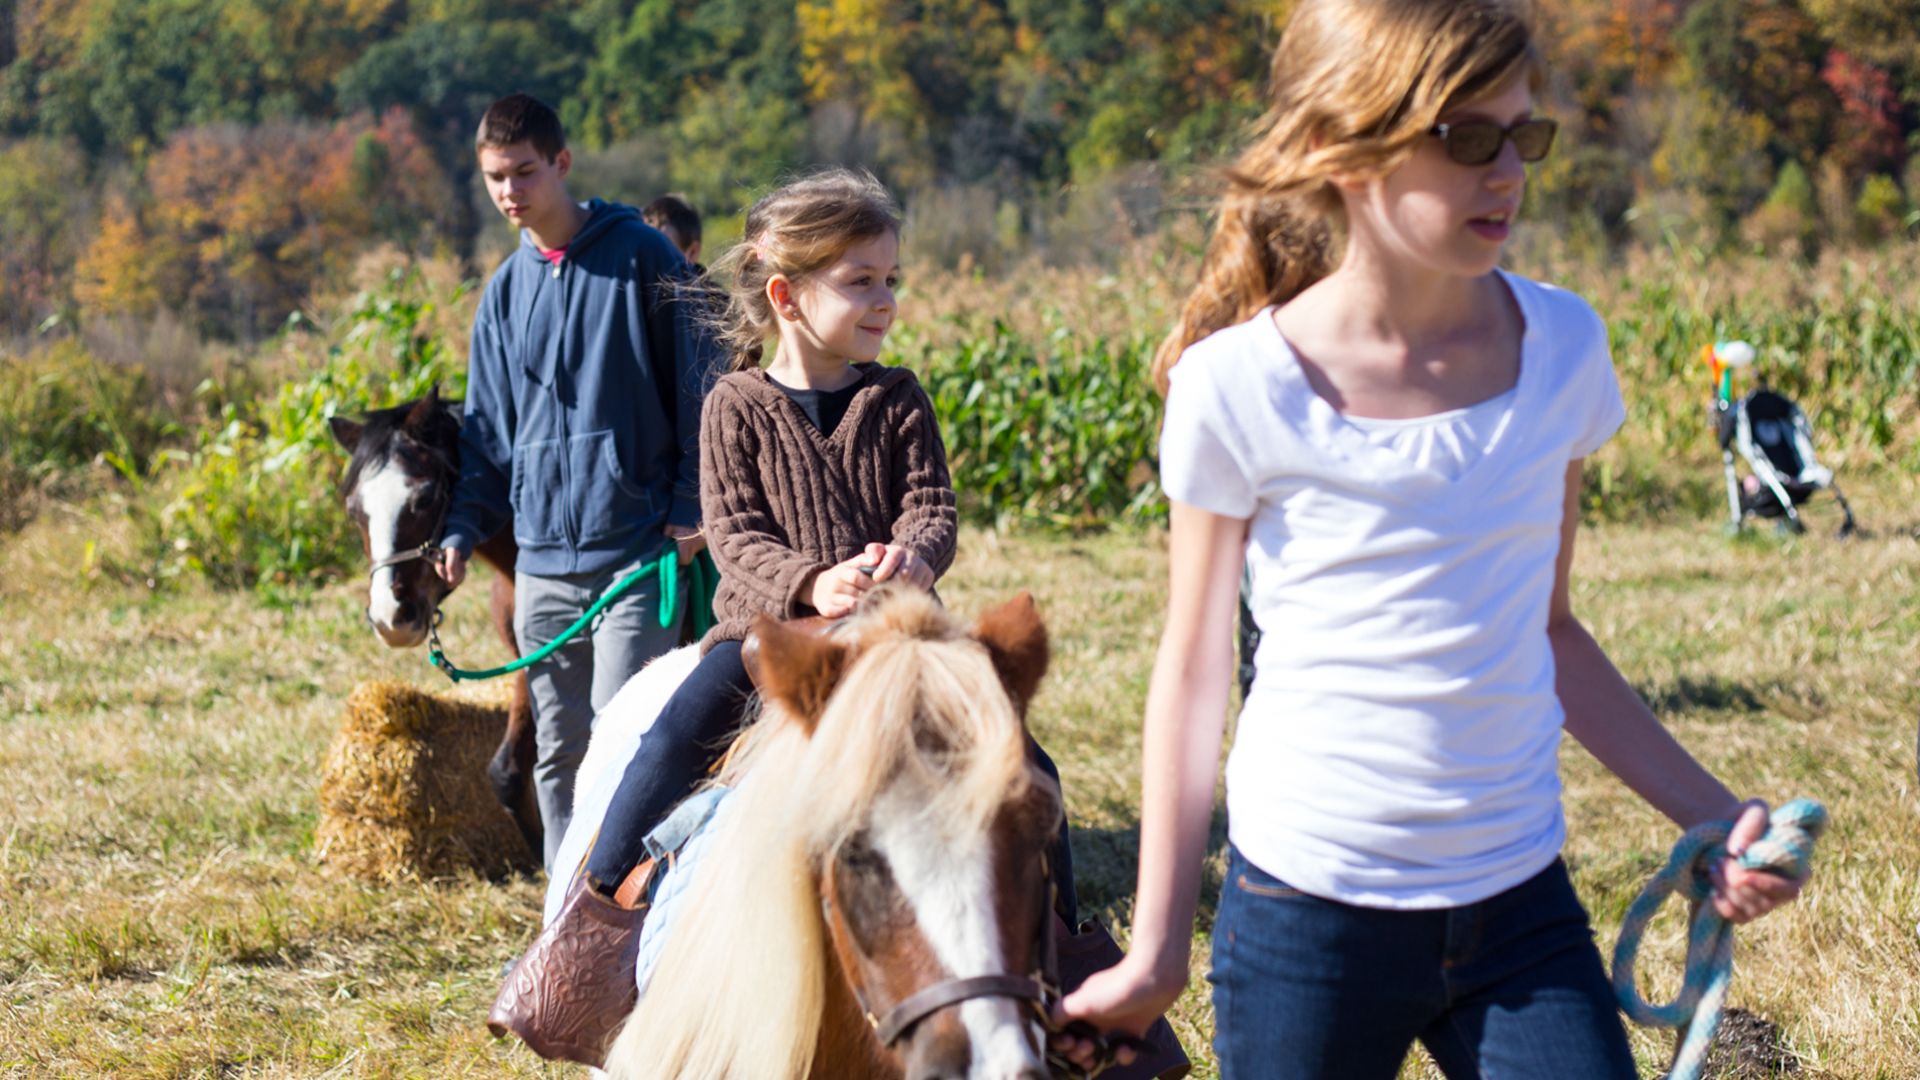 Girl riding a pony in Fall.